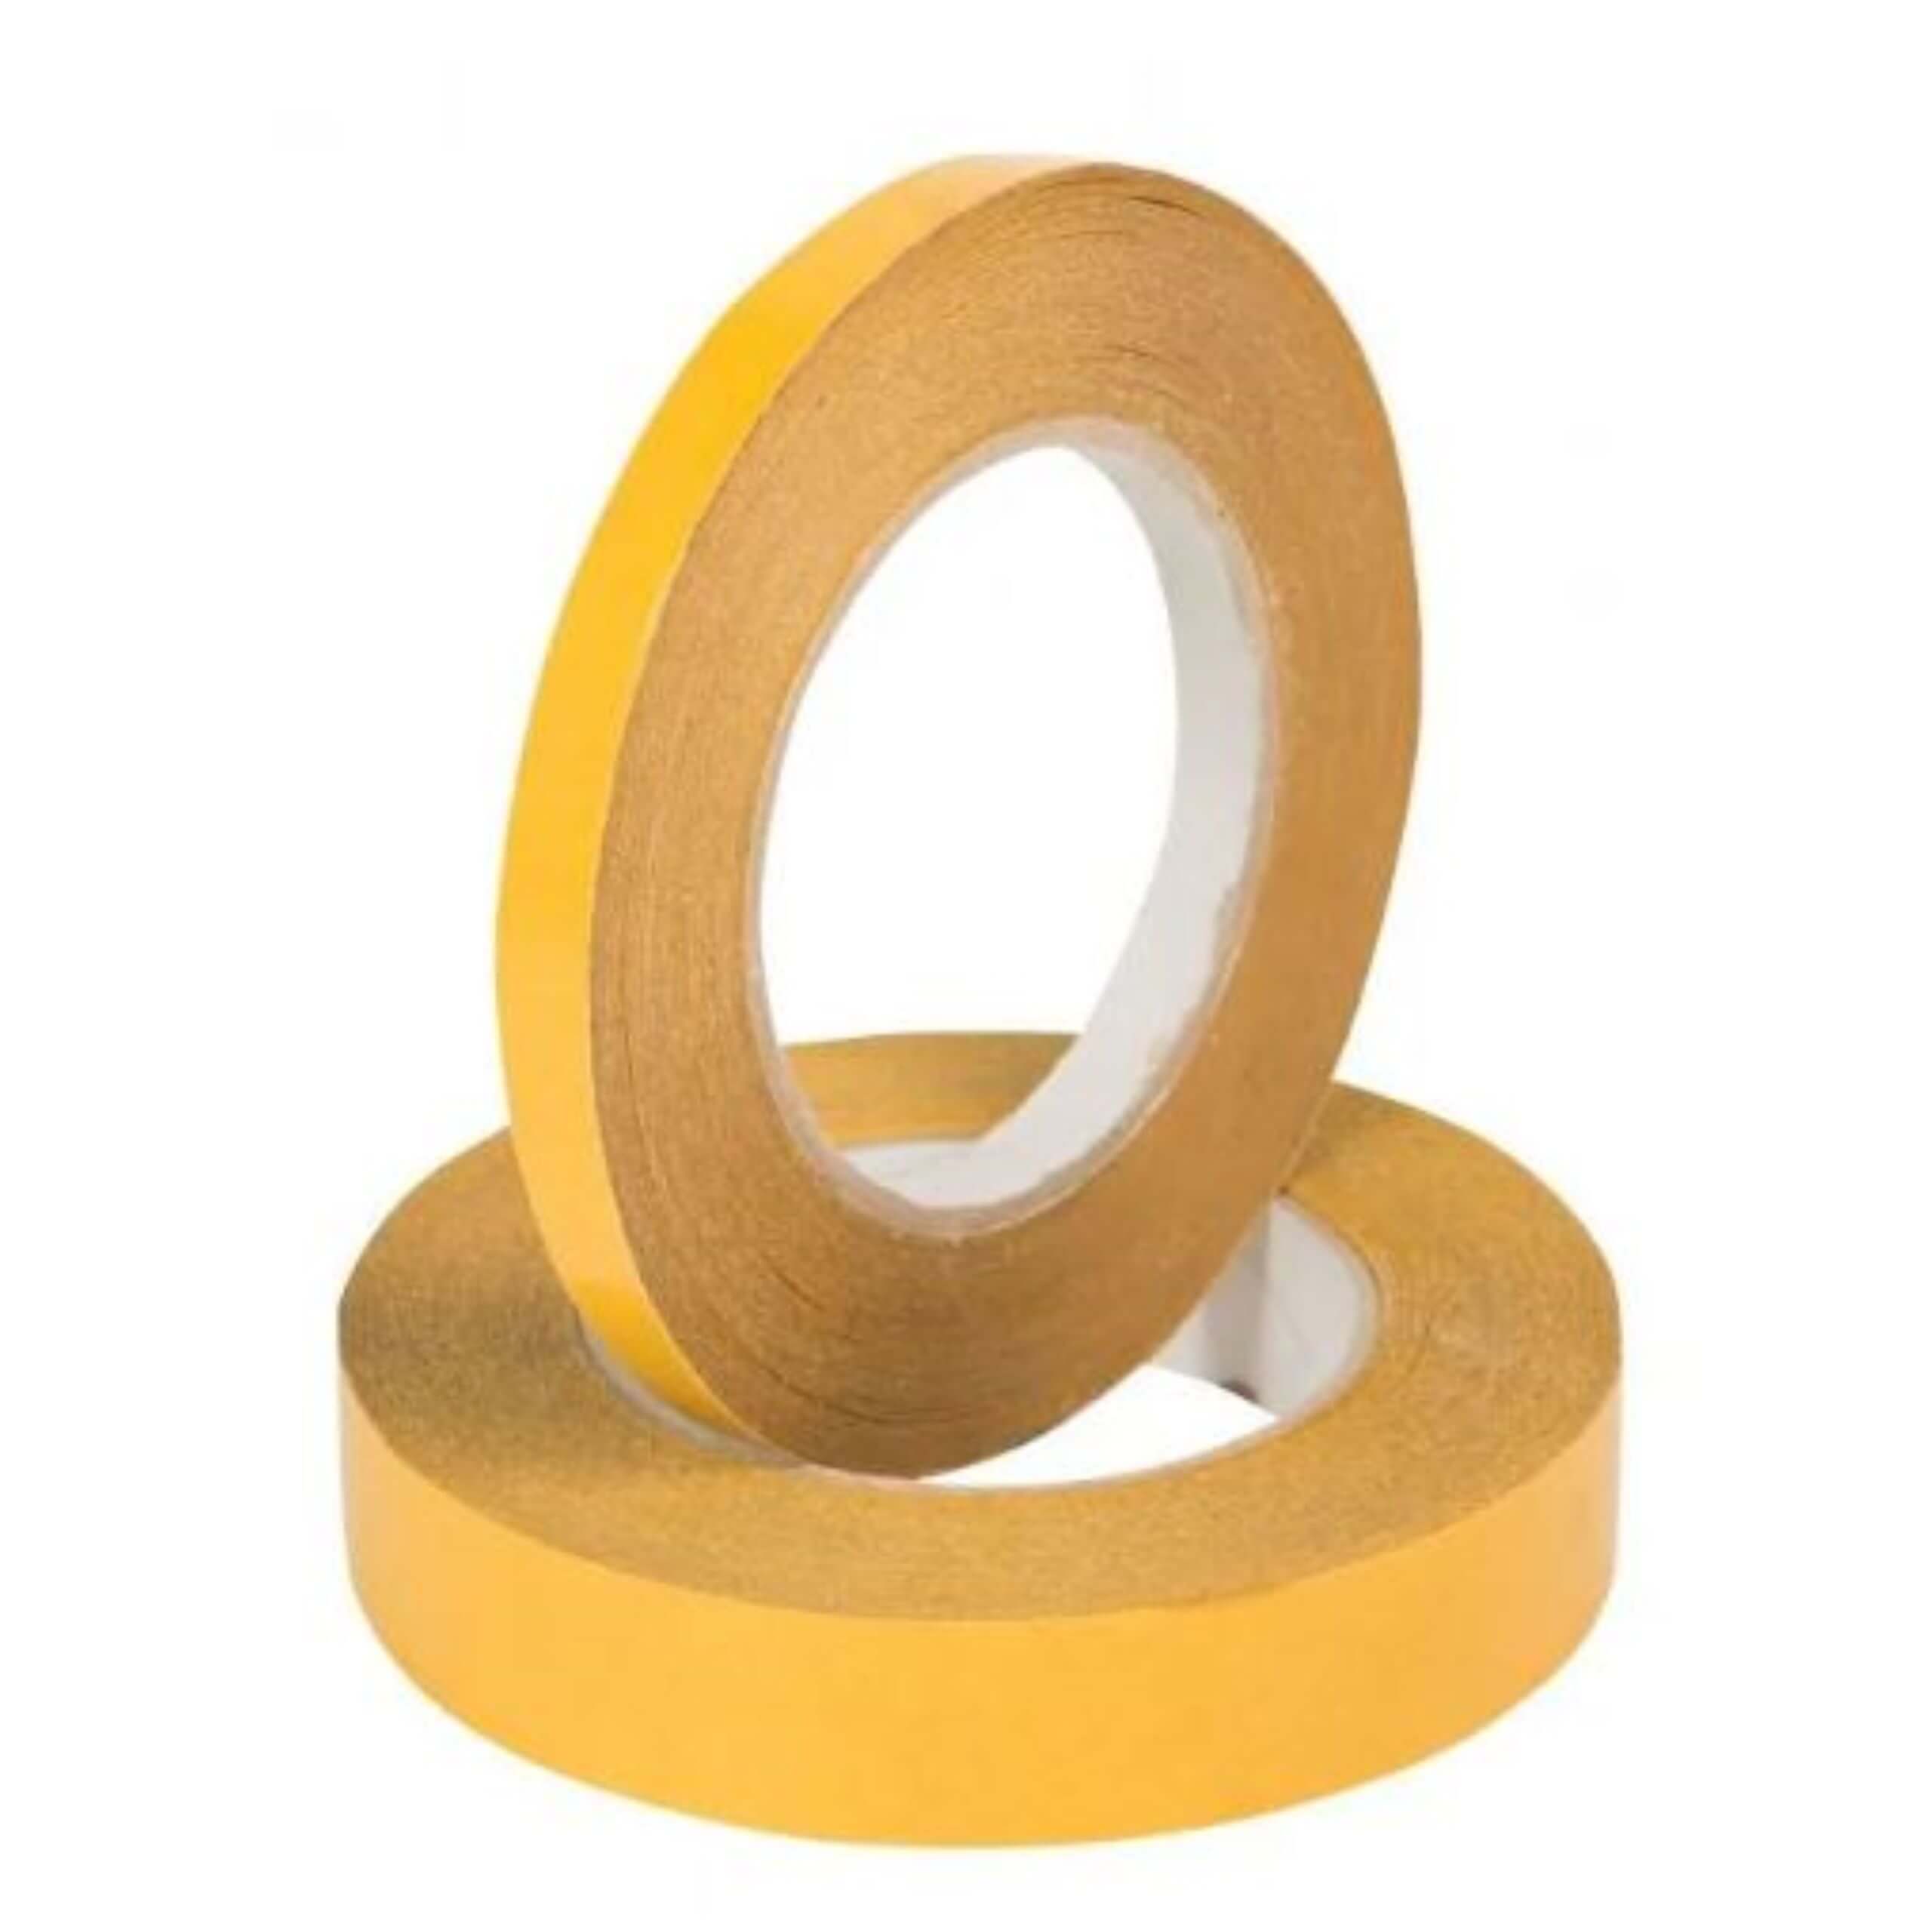 An image of double sided tape.